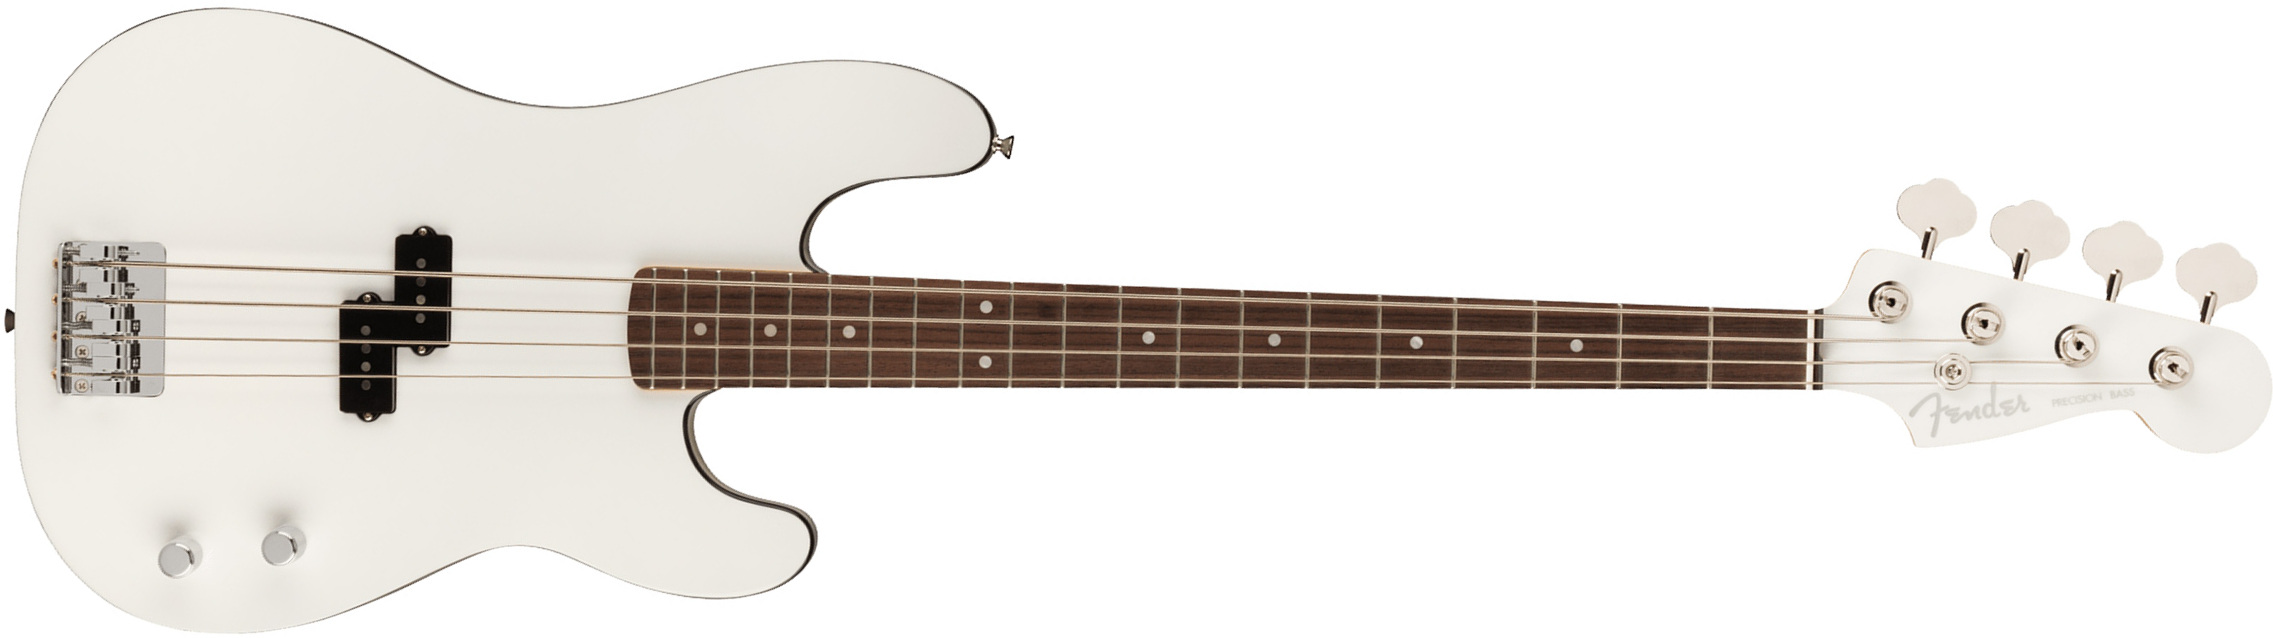 Fender Precision Bass Aerodyne Special Jap Rw - Bright White - Solid body electric bass - Main picture